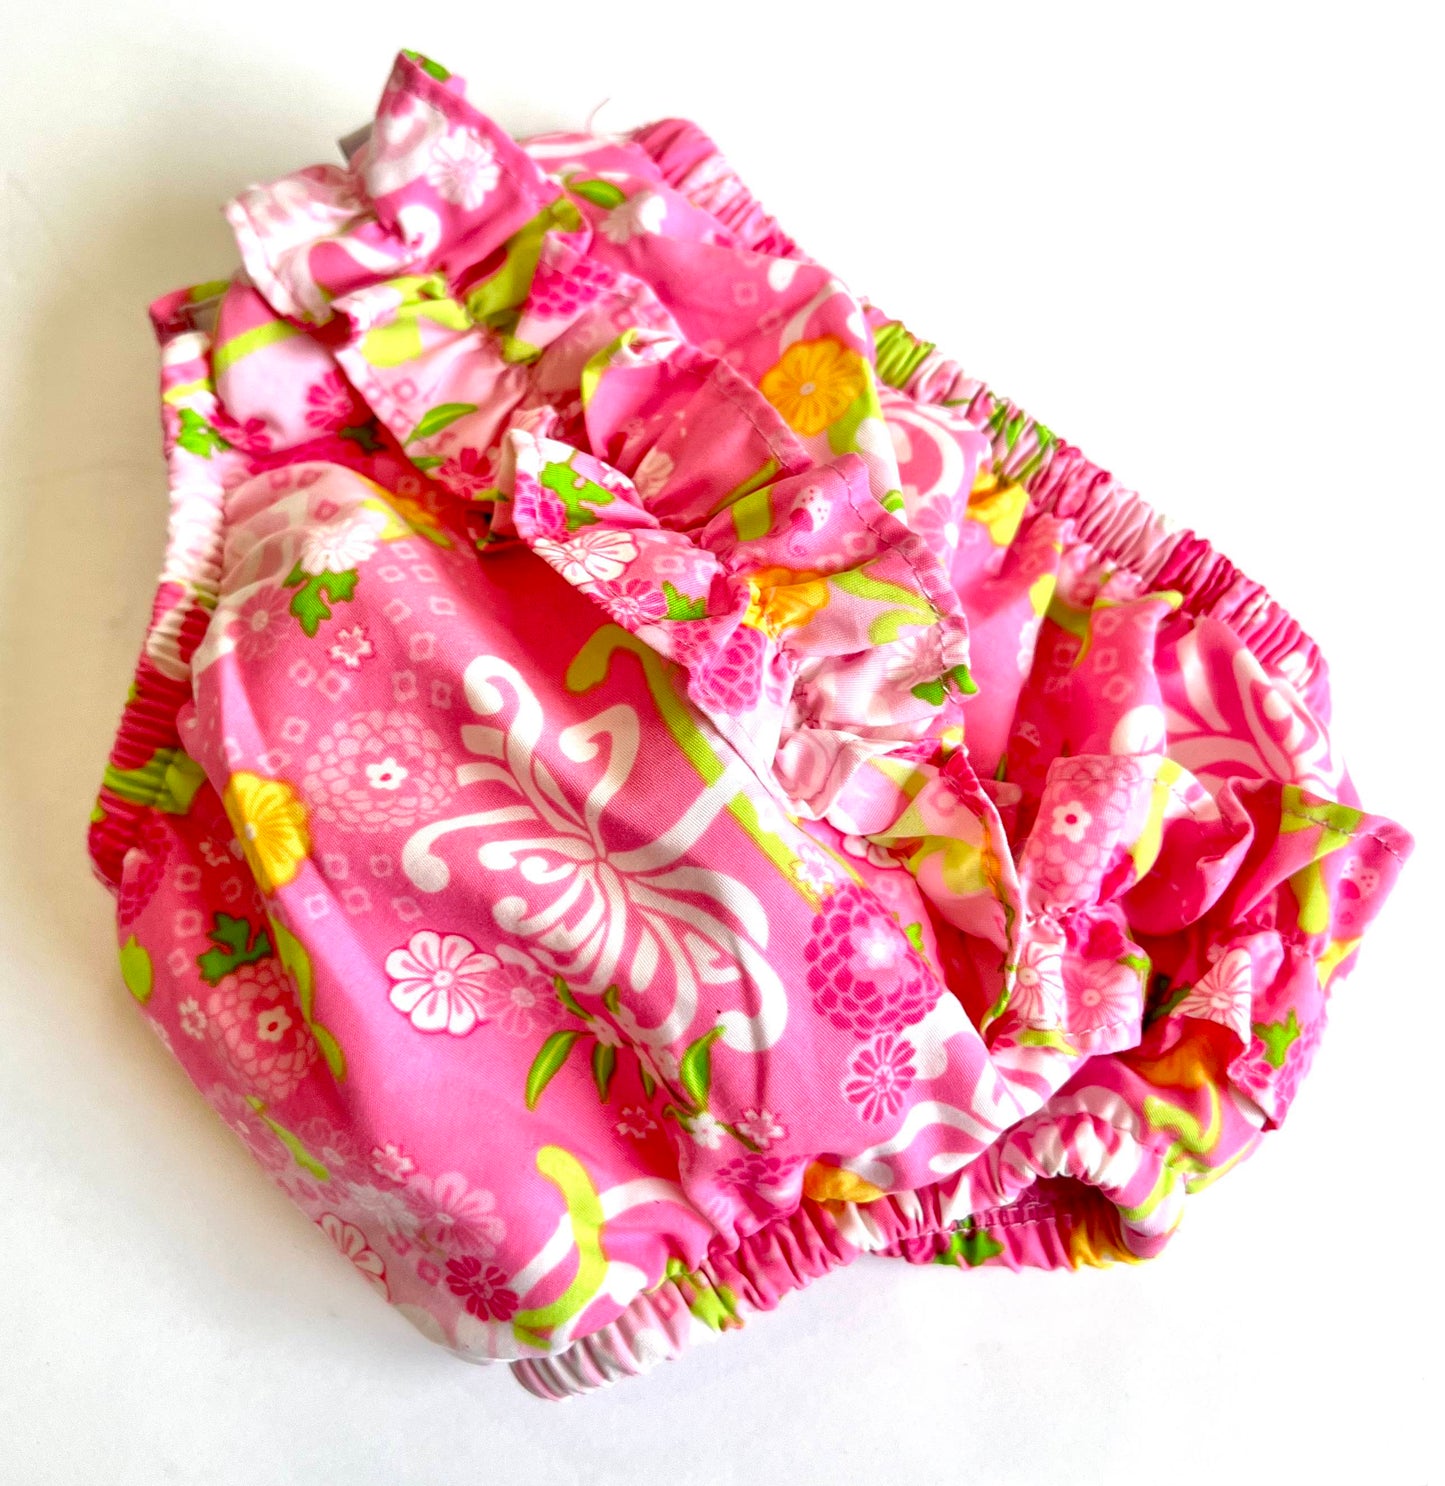 Girls 12-18 Mo I Play Swim Reusable Diaper Pink Ruffles Side Snaps UPF 50+ Excellent Condition (EC)